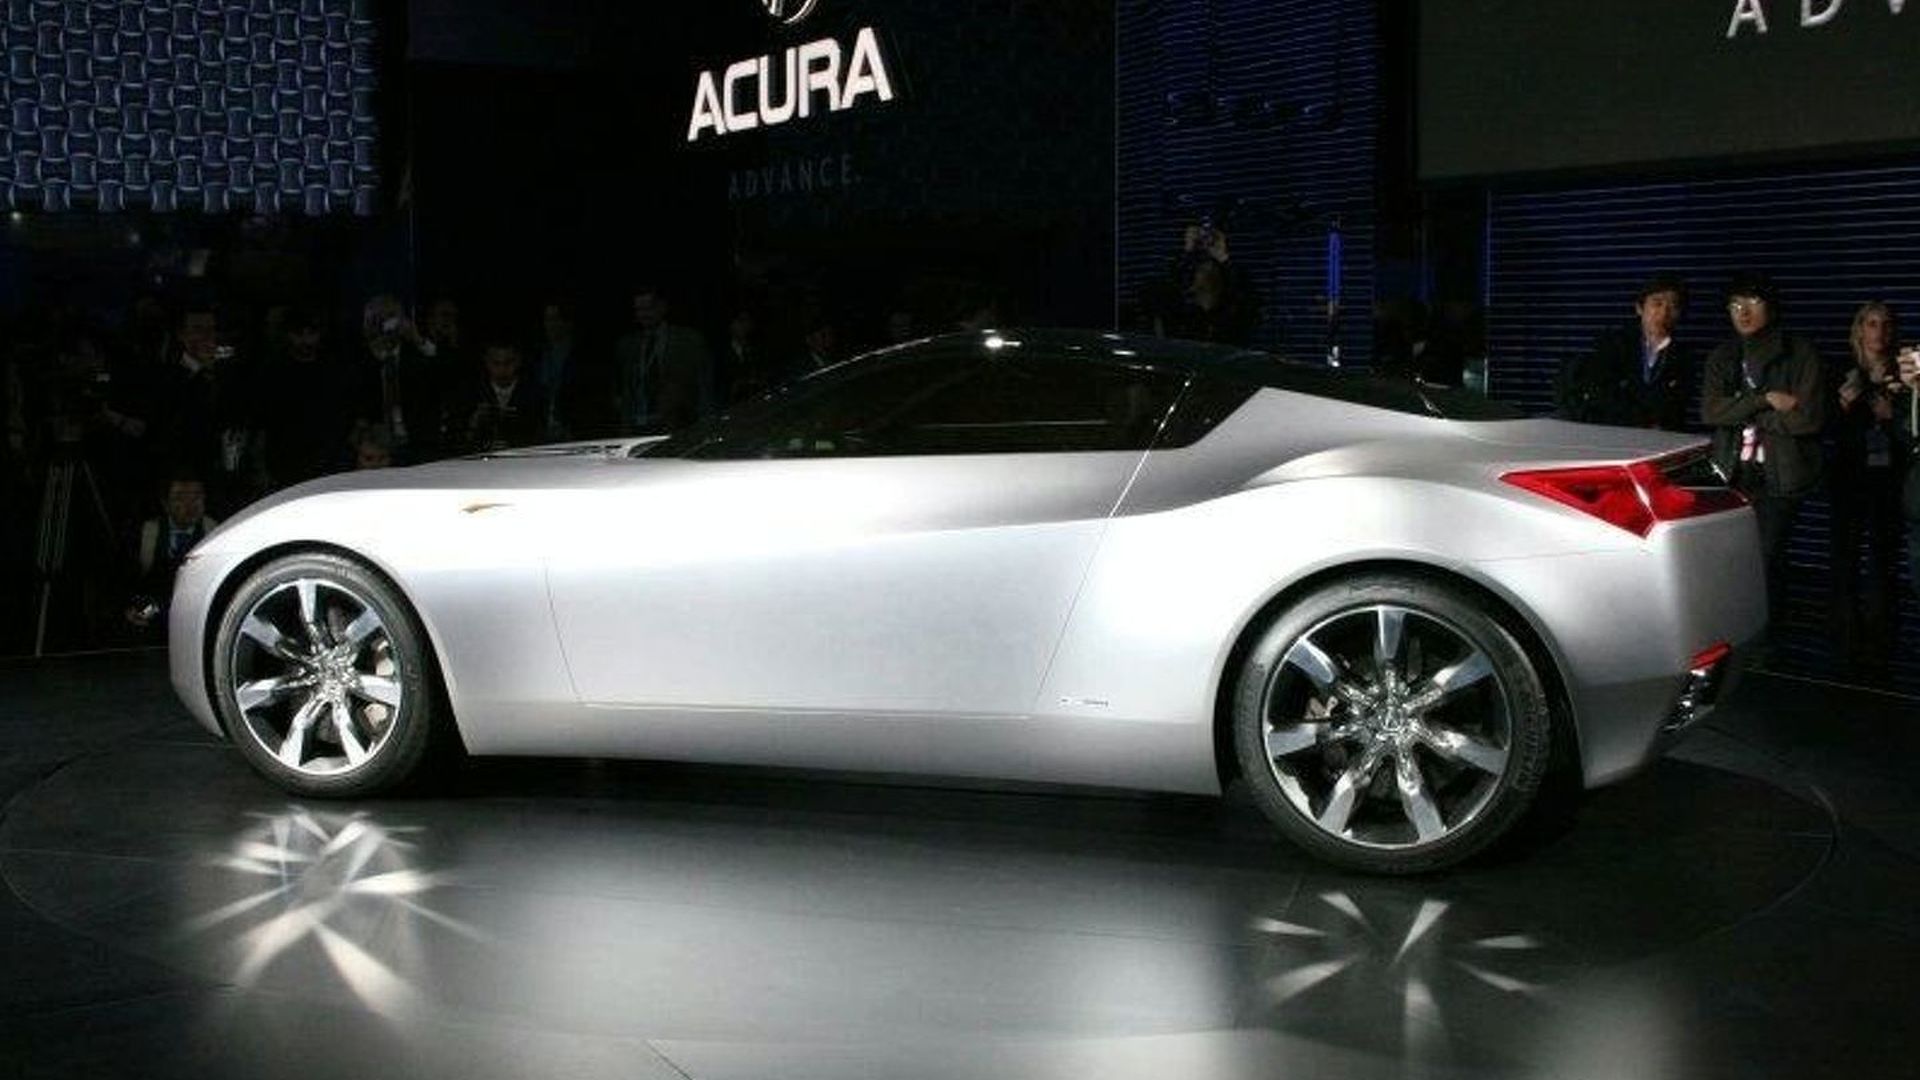 Acura Advanced Sports Car Concept Wallpapers